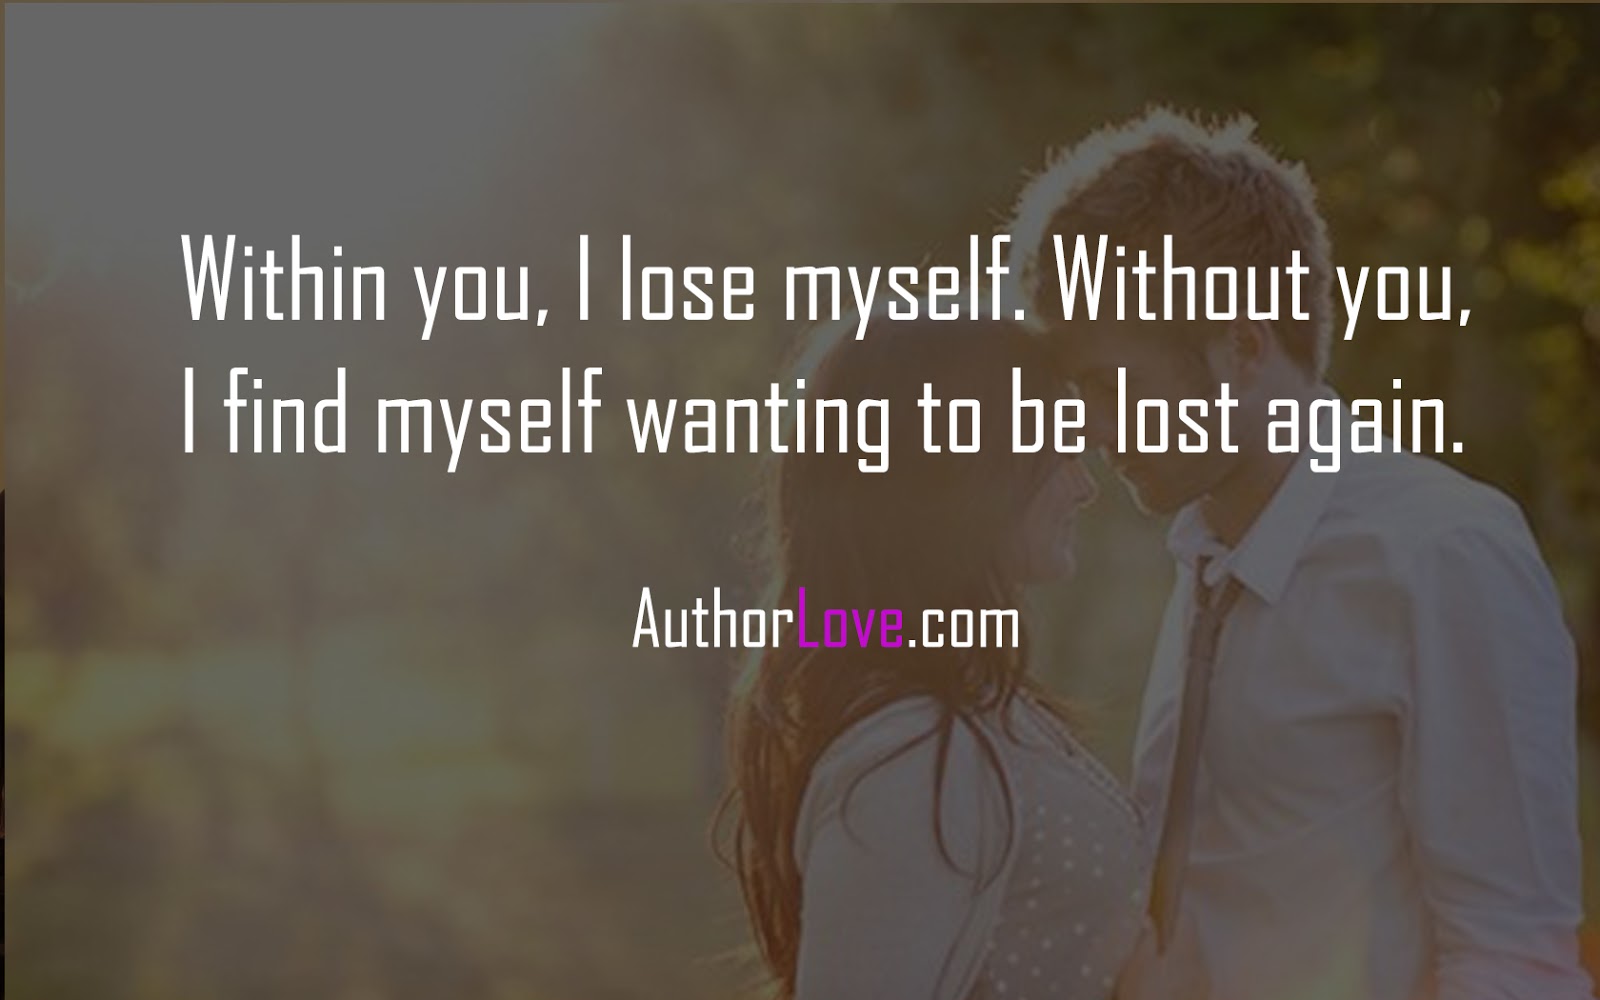 Without you, I find myself wanting to be lost again. 